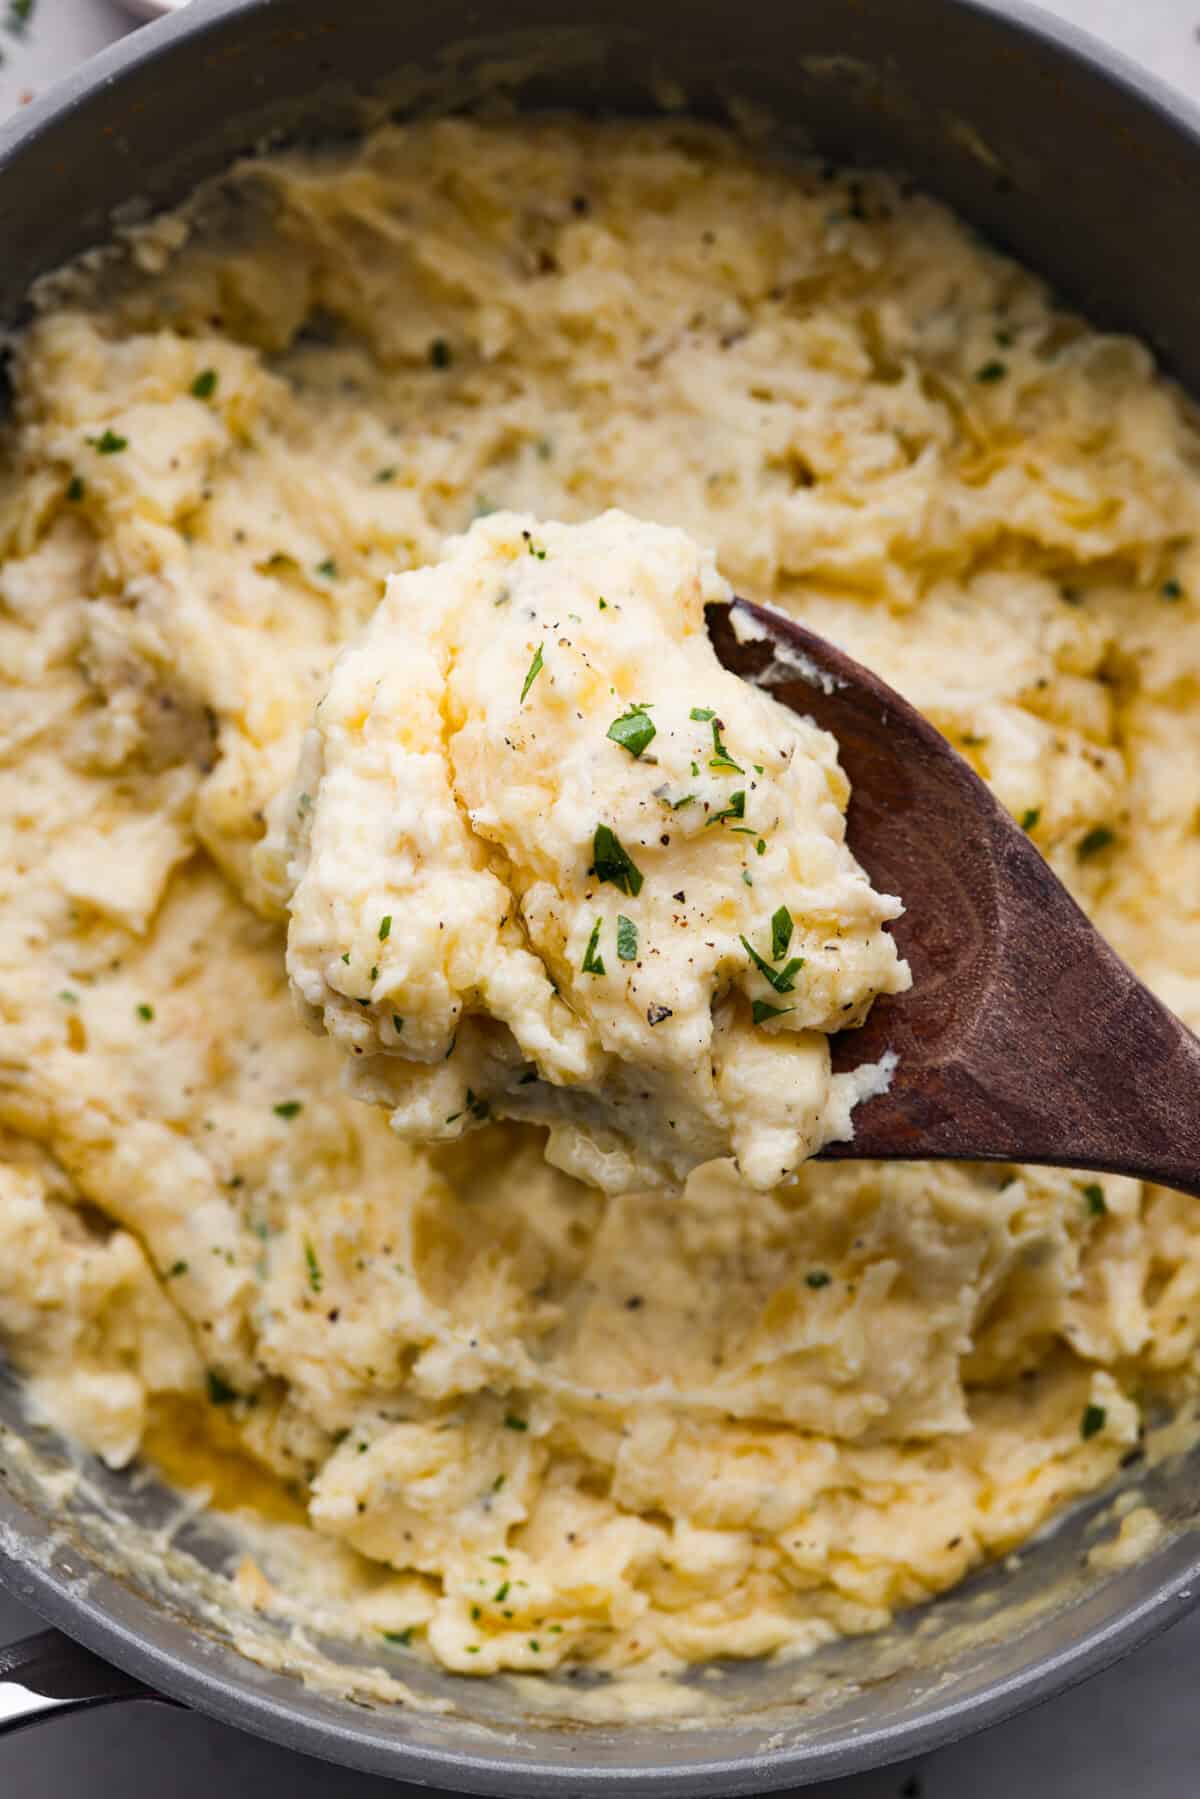 Close view of a wood serving spoon lifting a the mashed potatoes. - Boursin Mashed Potatoes